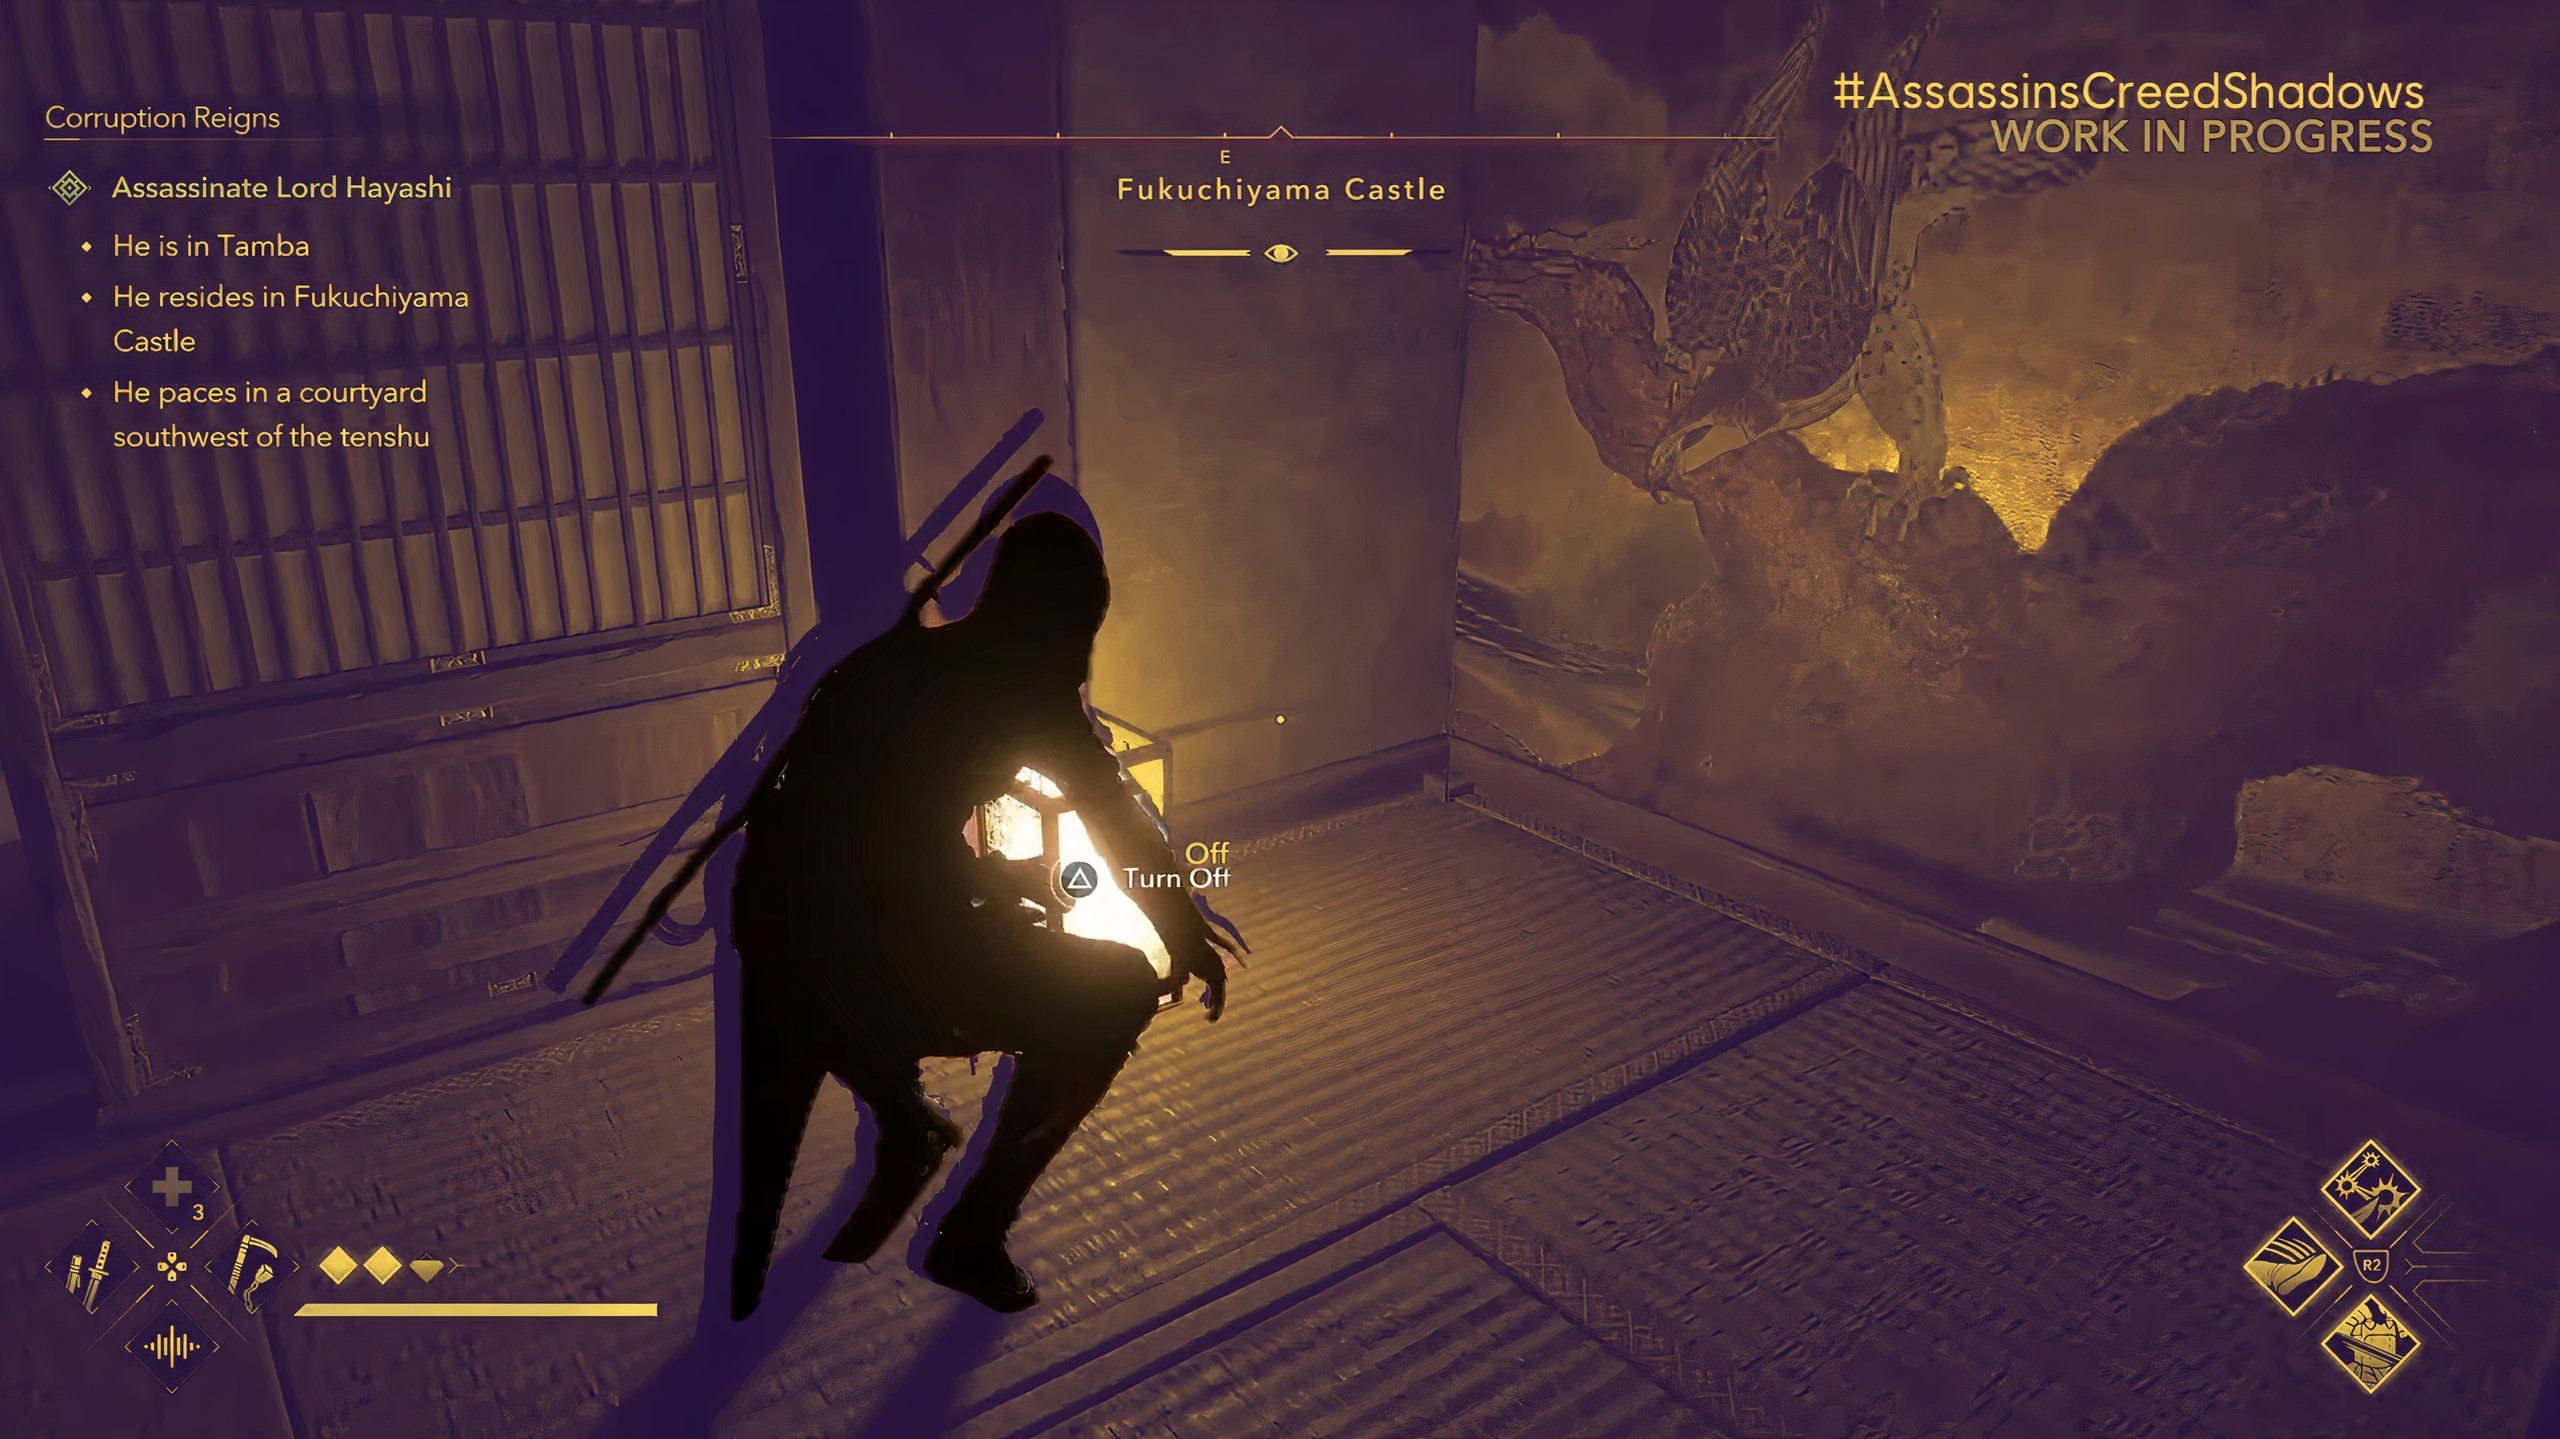 assassin's creed shadows character sneaking up to a lamp